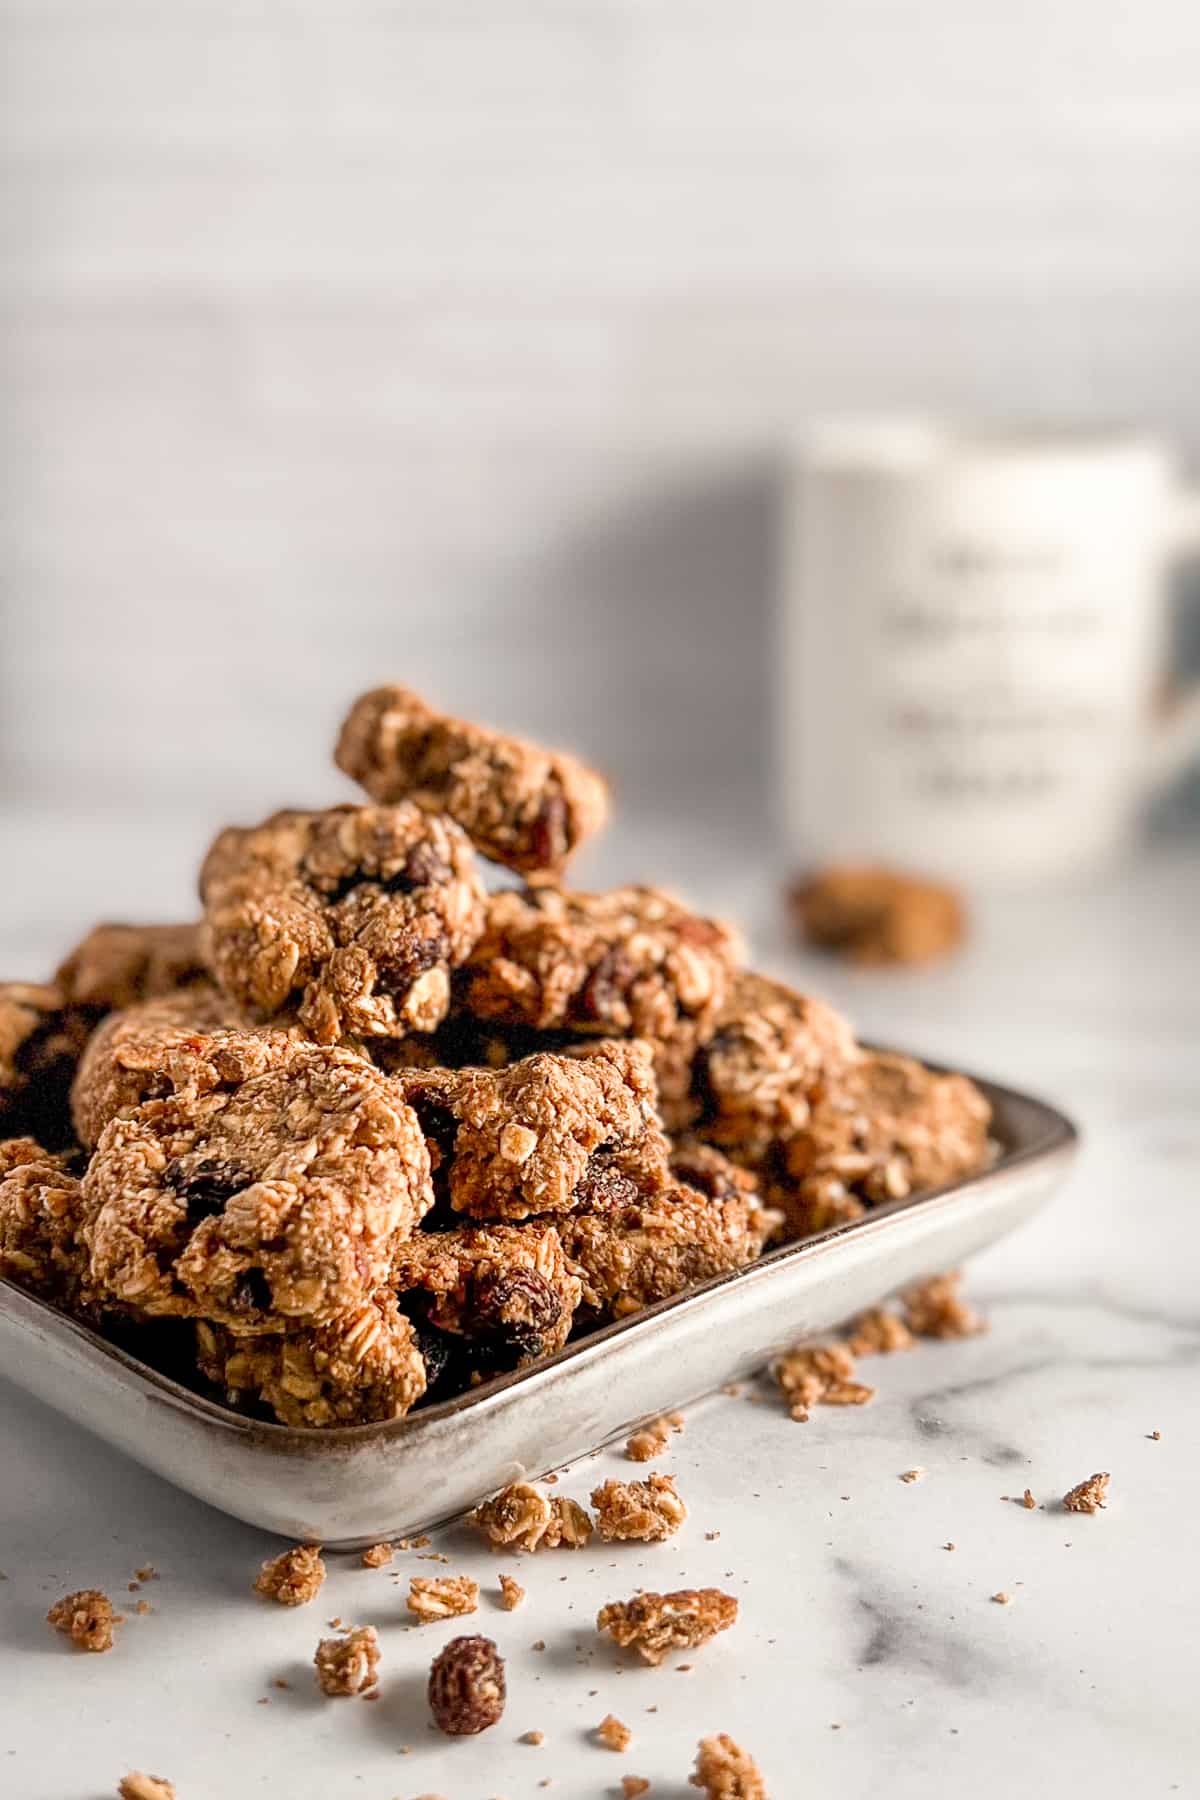 Side view and close up stack of healthy oatmeal raisin cookies on a square plate with a mug blurred in the background.